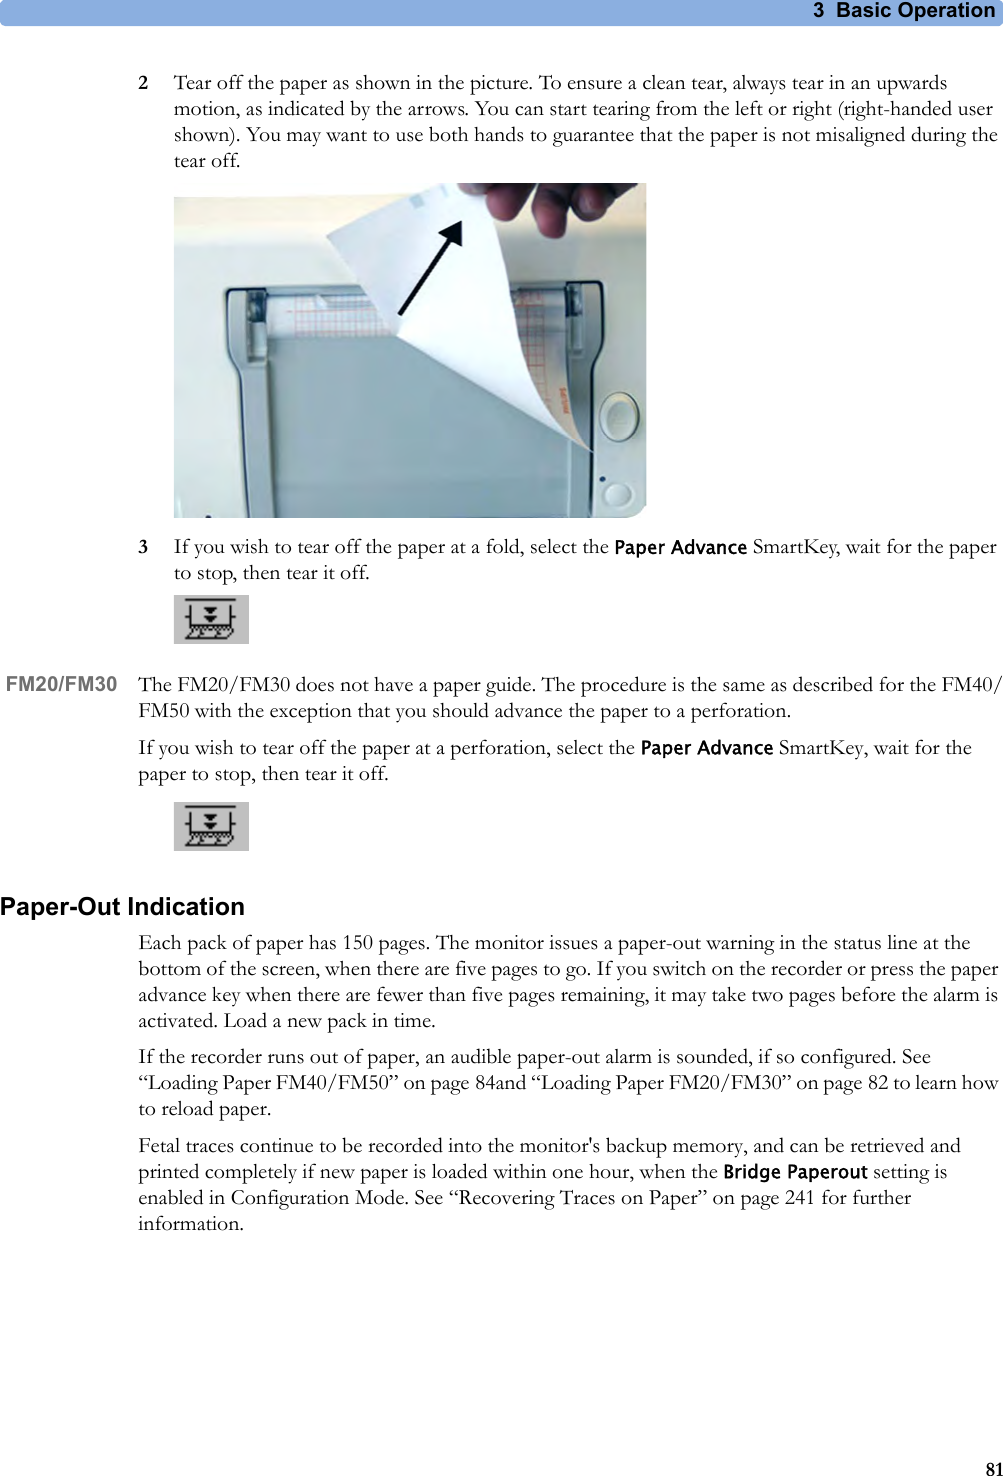 3 Basic Operation812Tear off the paper as shown in the picture. To ensure a clean tear, always tear in an upwards motion, as indicated by the arrows. You can start tearing from the left or right (right-handed user shown). You may want to use both hands to guarantee that the paper is not misaligned during the tear off.3If you wish to tear off the paper at a fold, select the Paper Advance SmartKey, wait for the paper to stop, then tear it off.FM20/FM30 The FM20/FM30 does not have a paper guide. The procedure is the same as described for the FM40/FM50 with the exception that you should advance the paper to a perforation. If you wish to tear off the paper at a perforation, select the Paper Advance SmartKey, wait for the paper to stop, then tear it off.Paper-Out IndicationEach pack of paper has 150 pages. The monitor issues a paper-out warning in the status line at the bottom of the screen, when there are five pages to go. If you switch on the recorder or press the paper advance key when there are fewer than five pages remaining, it may take two pages before the alarm is activated. Load a new pack in time.If the recorder runs out of paper, an audible paper-out alarm is sounded, if so configured. See “Loading Paper FM40/FM50” on page 84and “Loading Paper FM20/FM30” on page 82 to learn how to reload paper. Fetal traces continue to be recorded into the monitor&apos;s backup memory, and can be retrieved and printed completely if new paper is loaded within one hour, when the Bridge Paperout setting is enabled in Configuration Mode. See “Recovering Traces on Paper” on page 241 for further information.